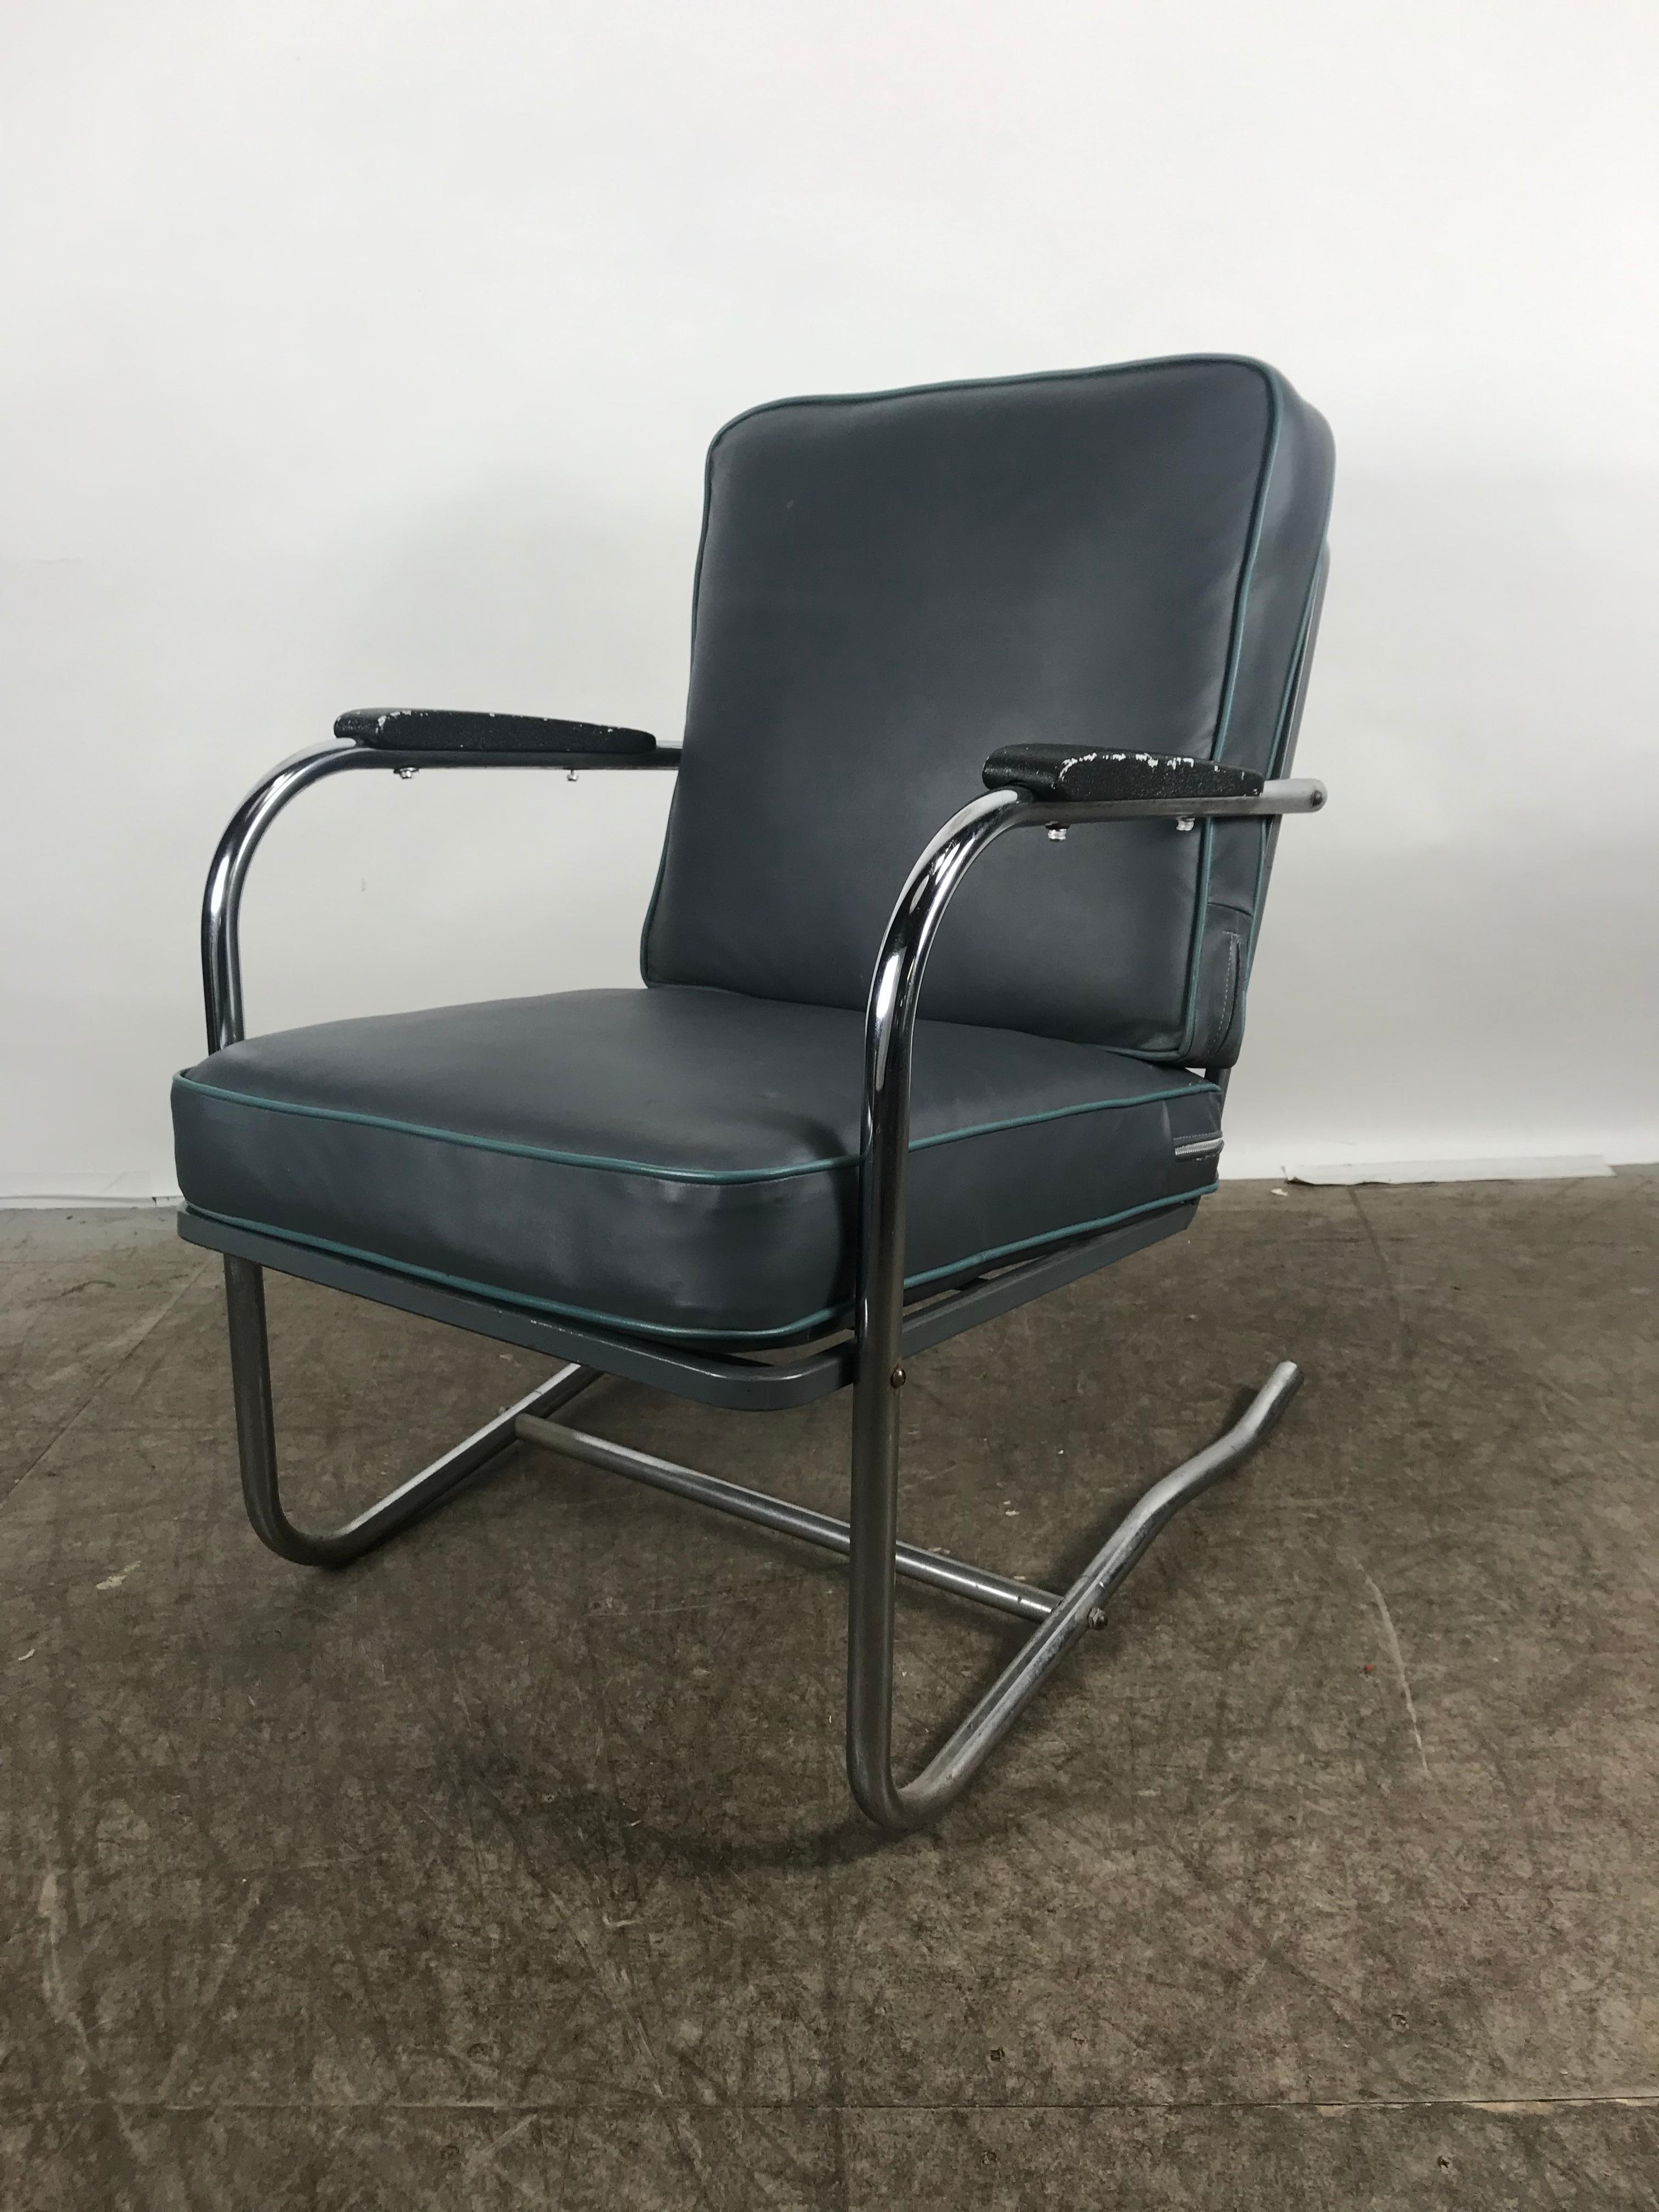 Classic Art Deco, Bauhaus tubular chrome lounge chair. Cantilever chrome frame, recently upholstered in a blue Naugahyde fabric with baby blue piping, extremely comfortable.